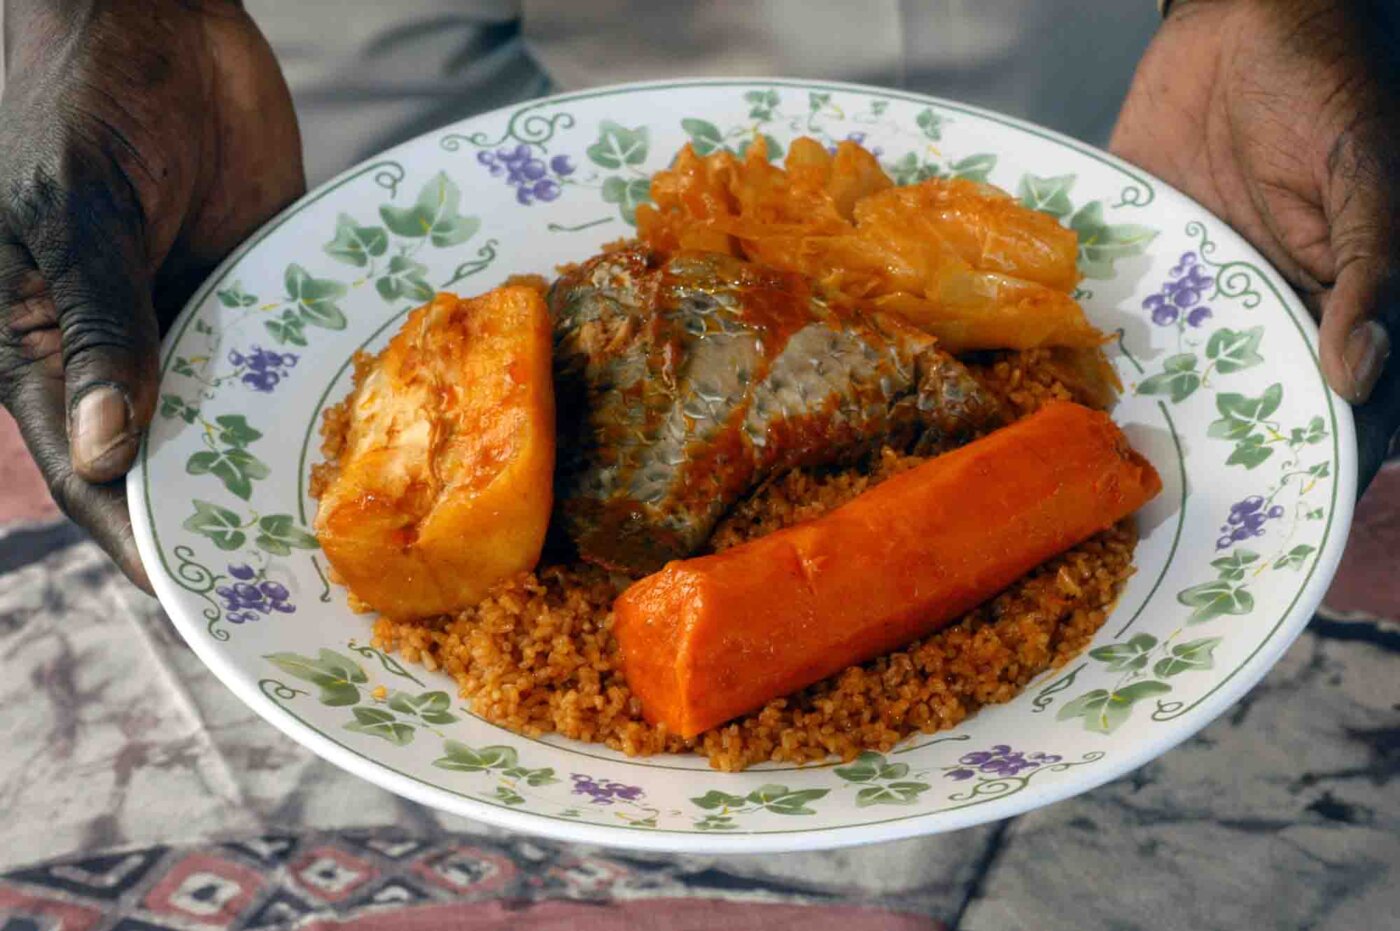 Chez Seneba: Oowner Fallou Sene holds Thiebu Jenn: Djdof rice cooked in a rich tomato sauce served with fish, carrots, cabbage, yucca and eggplant.